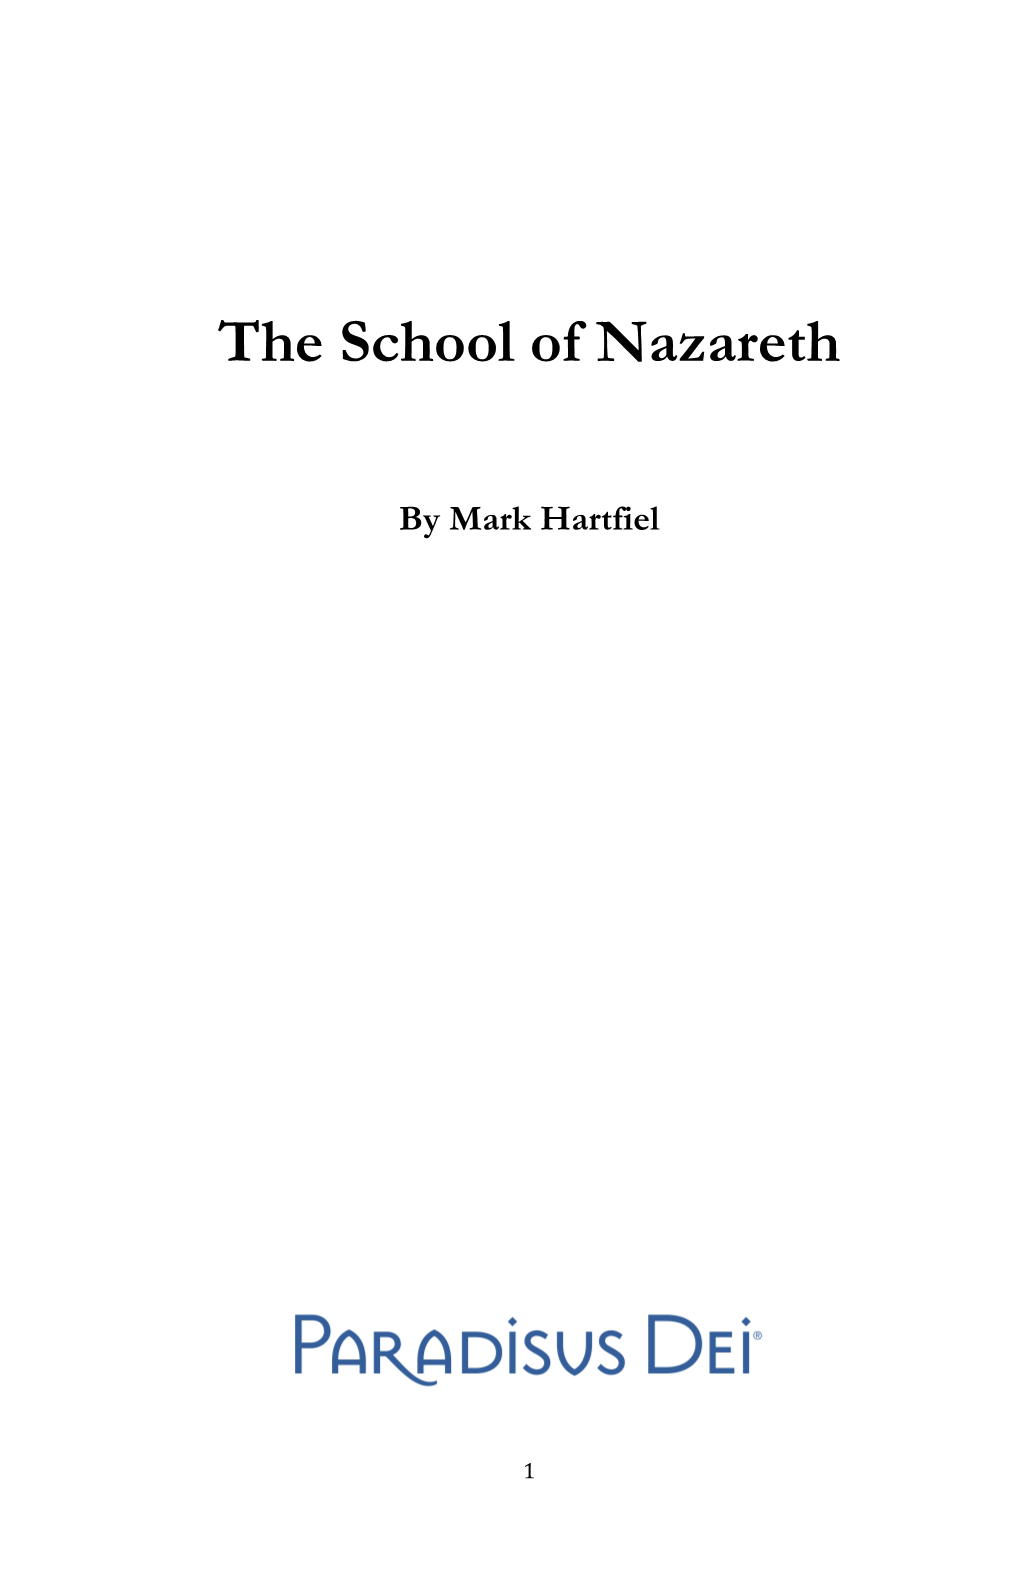 The School of Nazareth: a Spiritual Journey with St. Joseph by Mark